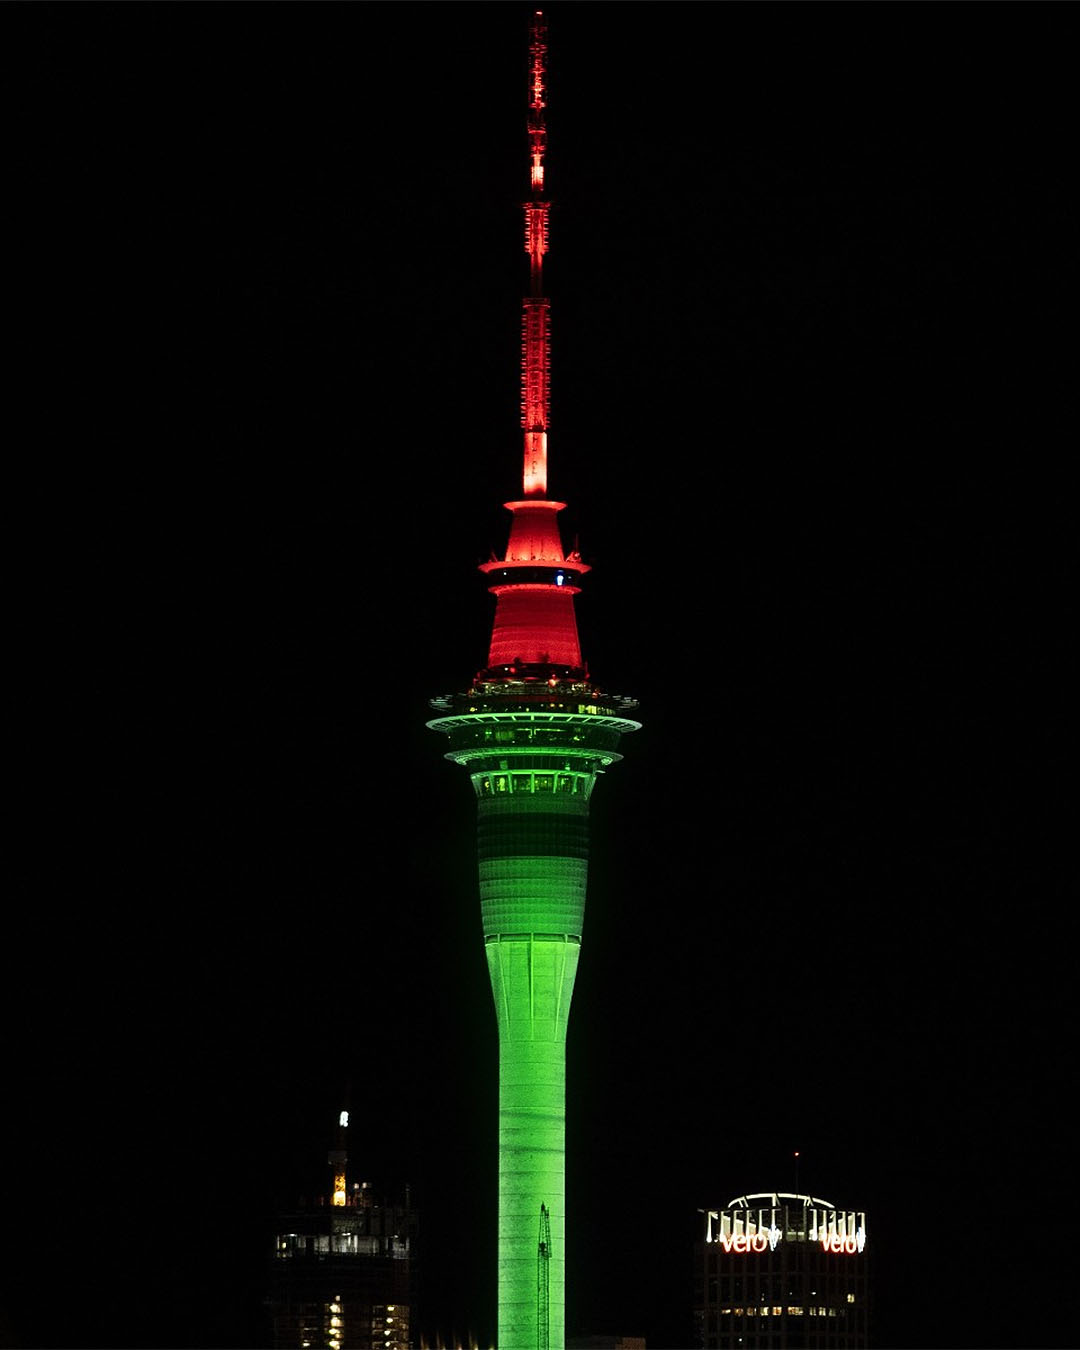 Arguably the biggest Christmas tree in Auckland, the Sky Tower will be lit up to become one of the best Christmas lights in Auckland.